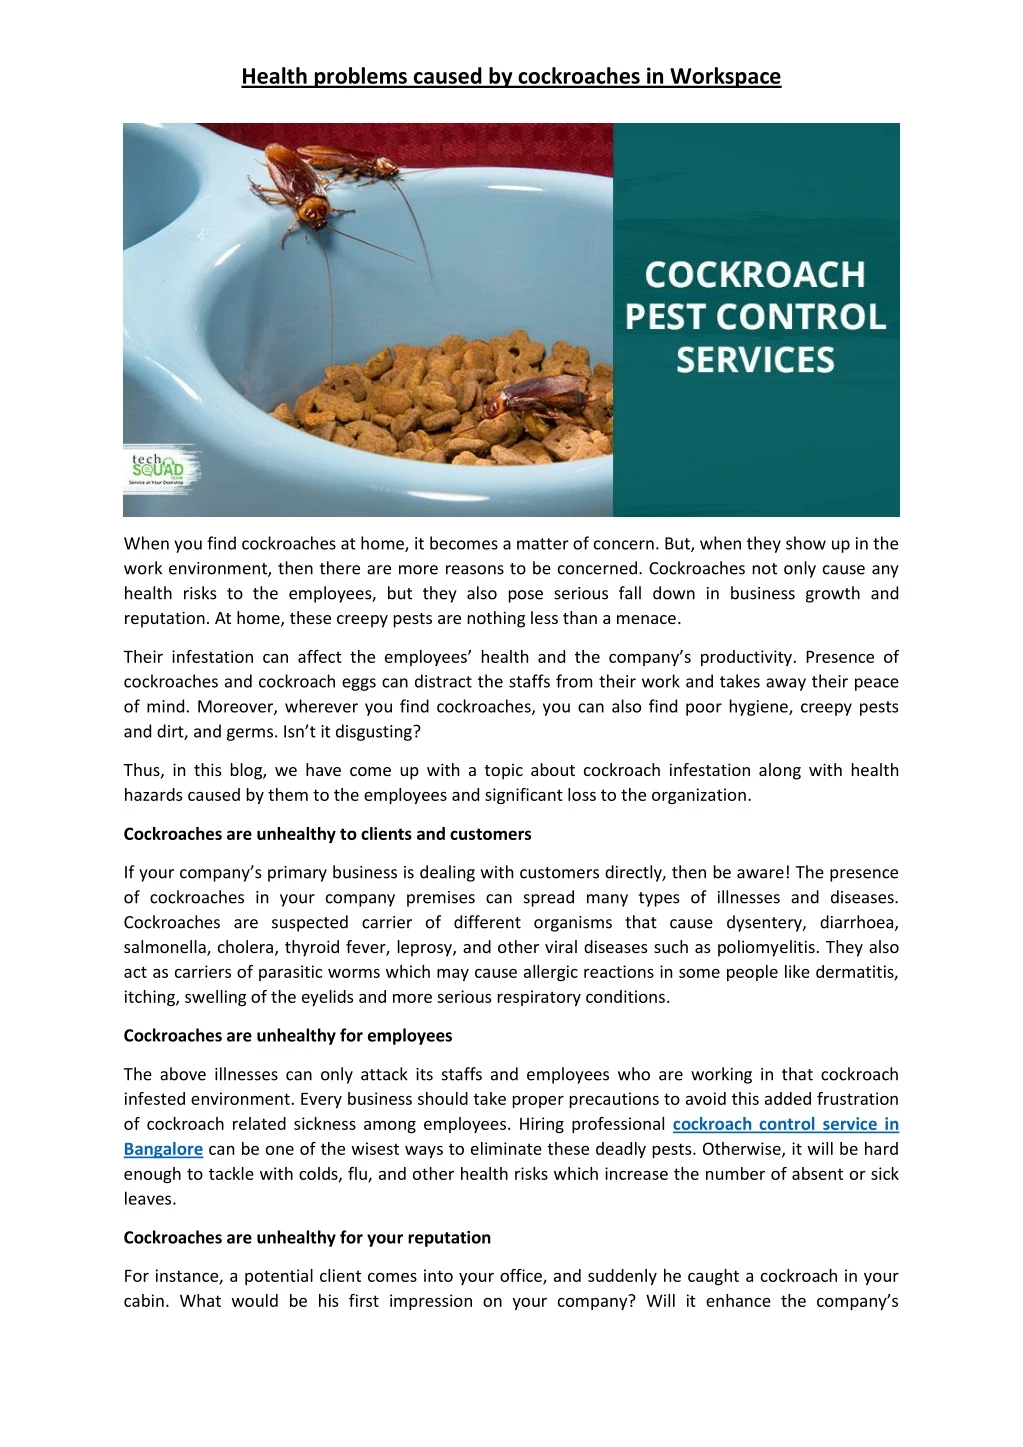 health problems caused by cockroaches in workspace